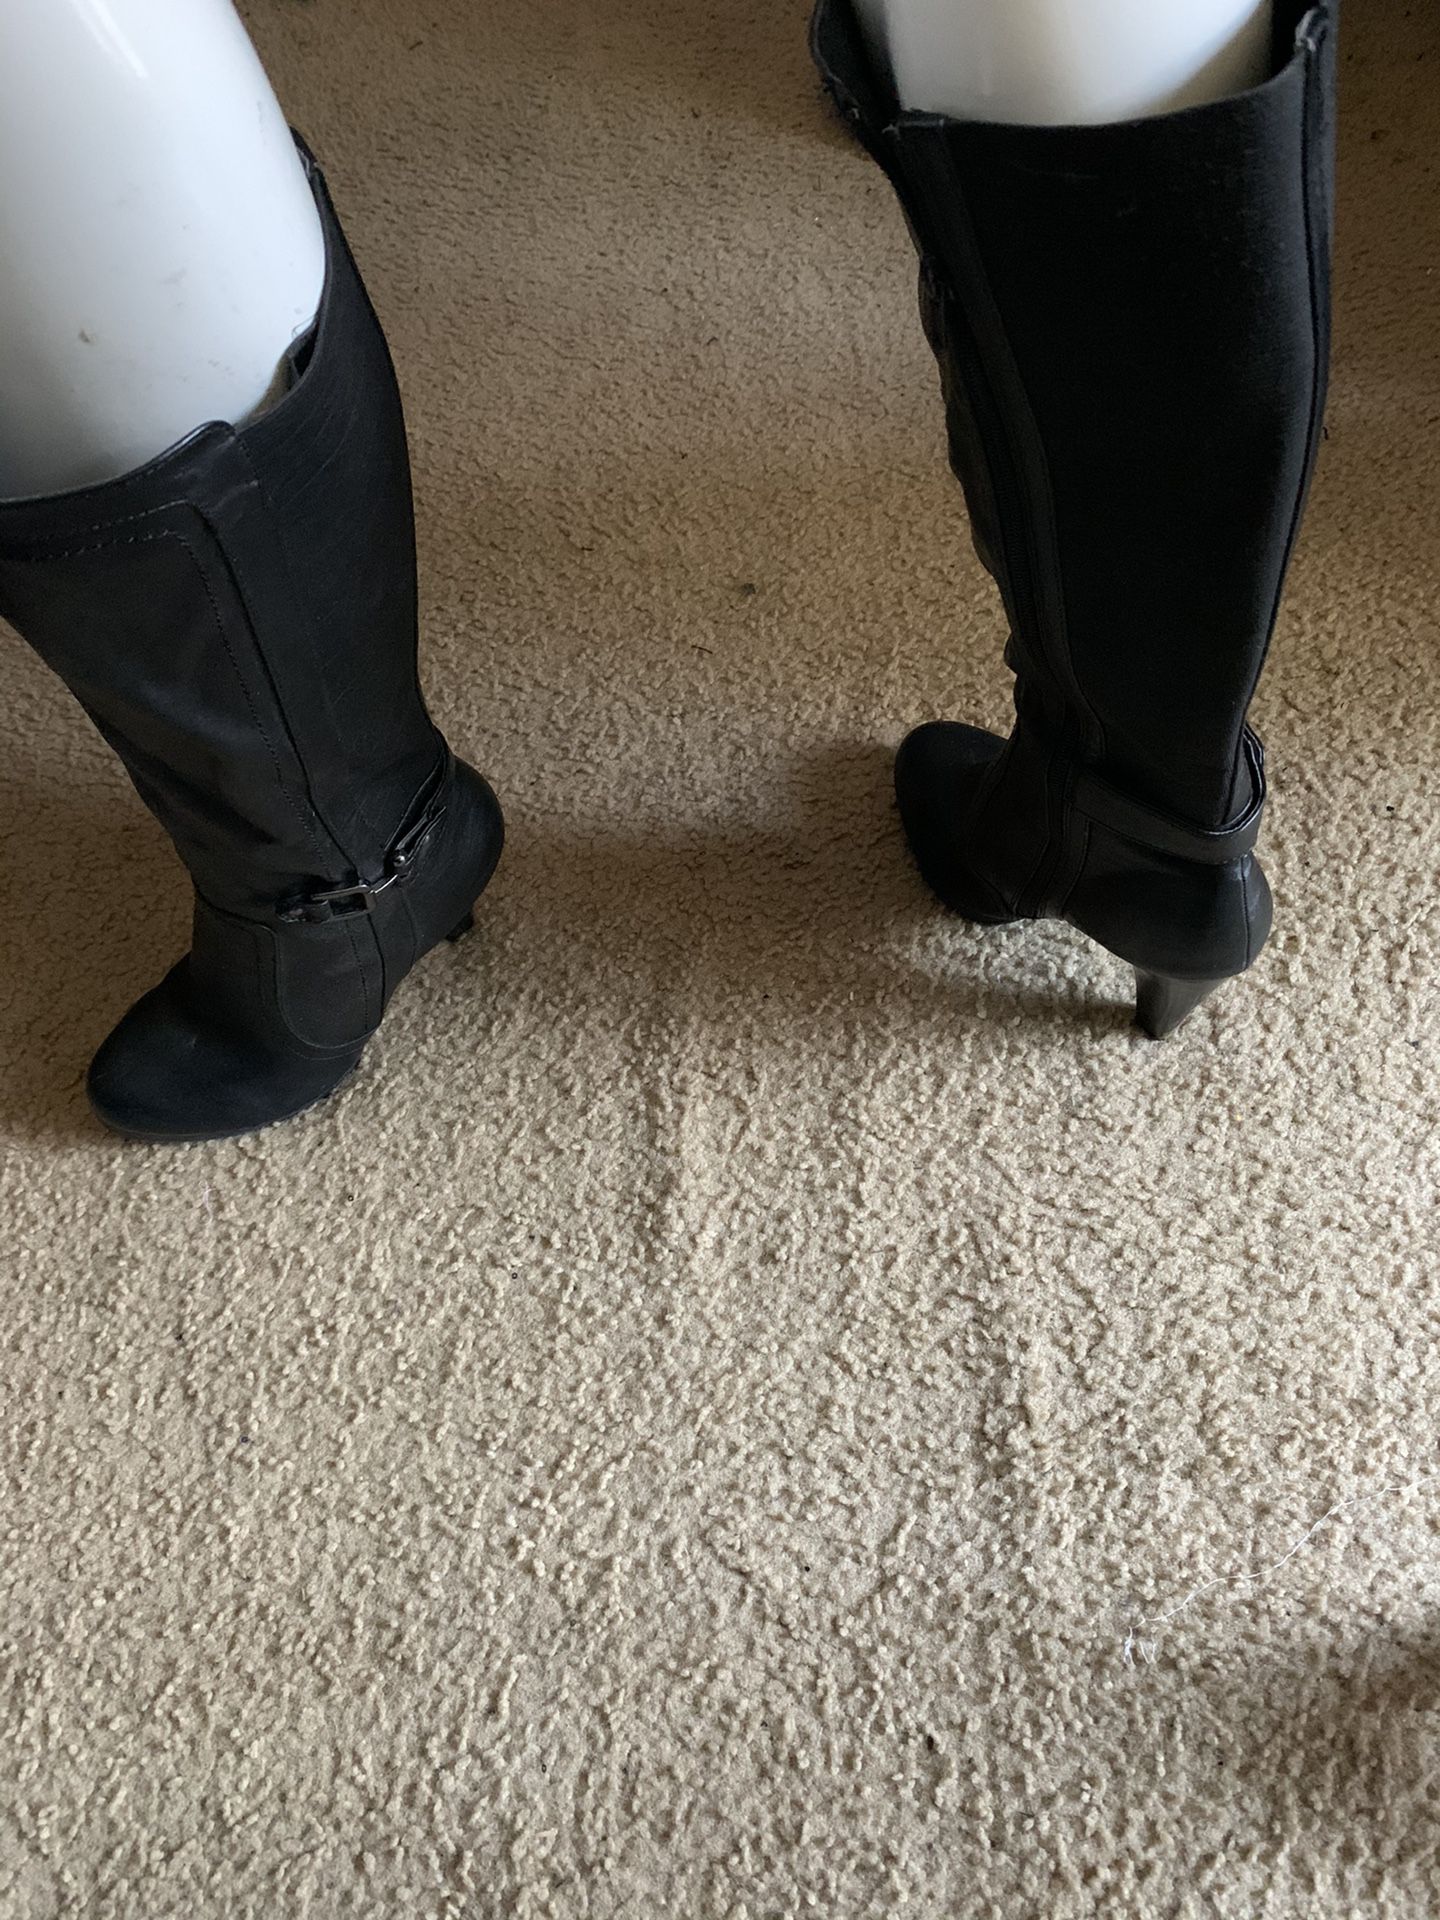 3 pair boots & 1 pair flats Size 9